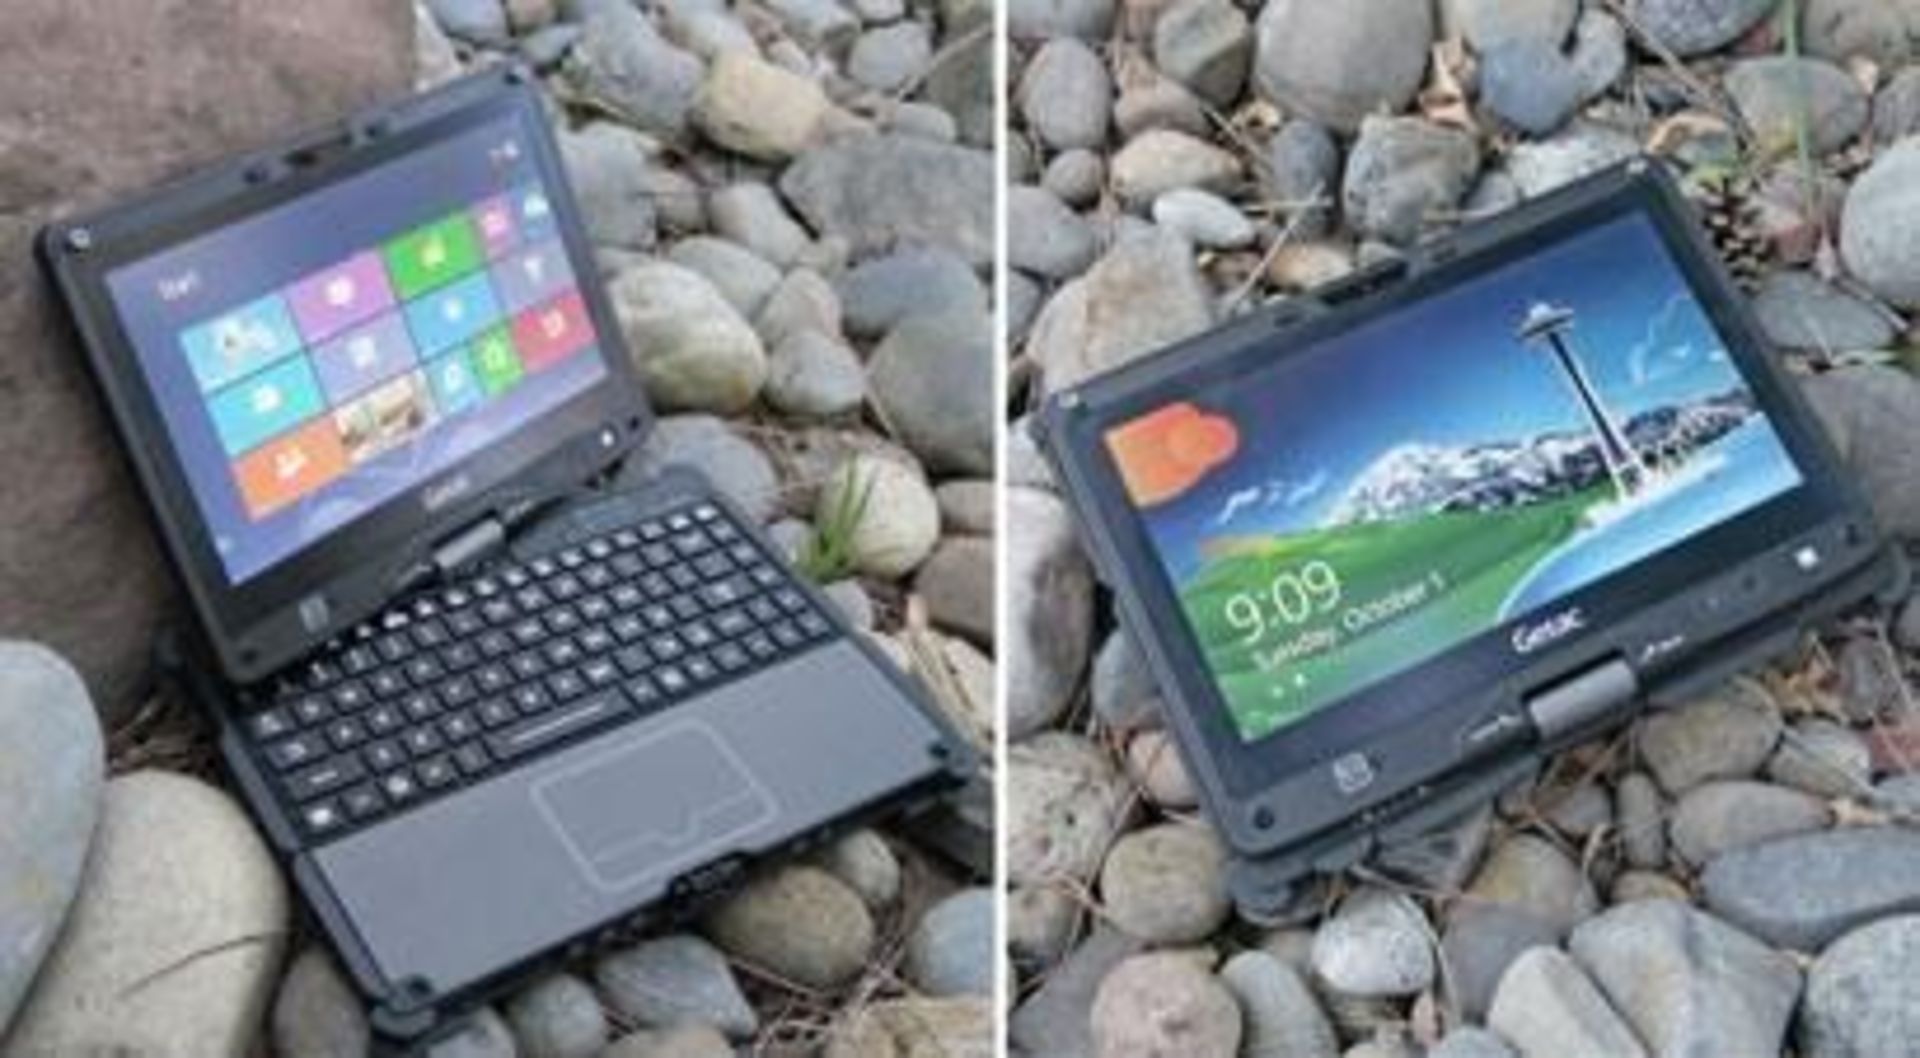 1 x Getac V200 Rugged Laptop Computer - Rugged Laptop That Transforms into a Tablet PC - Features an - Image 2 of 8